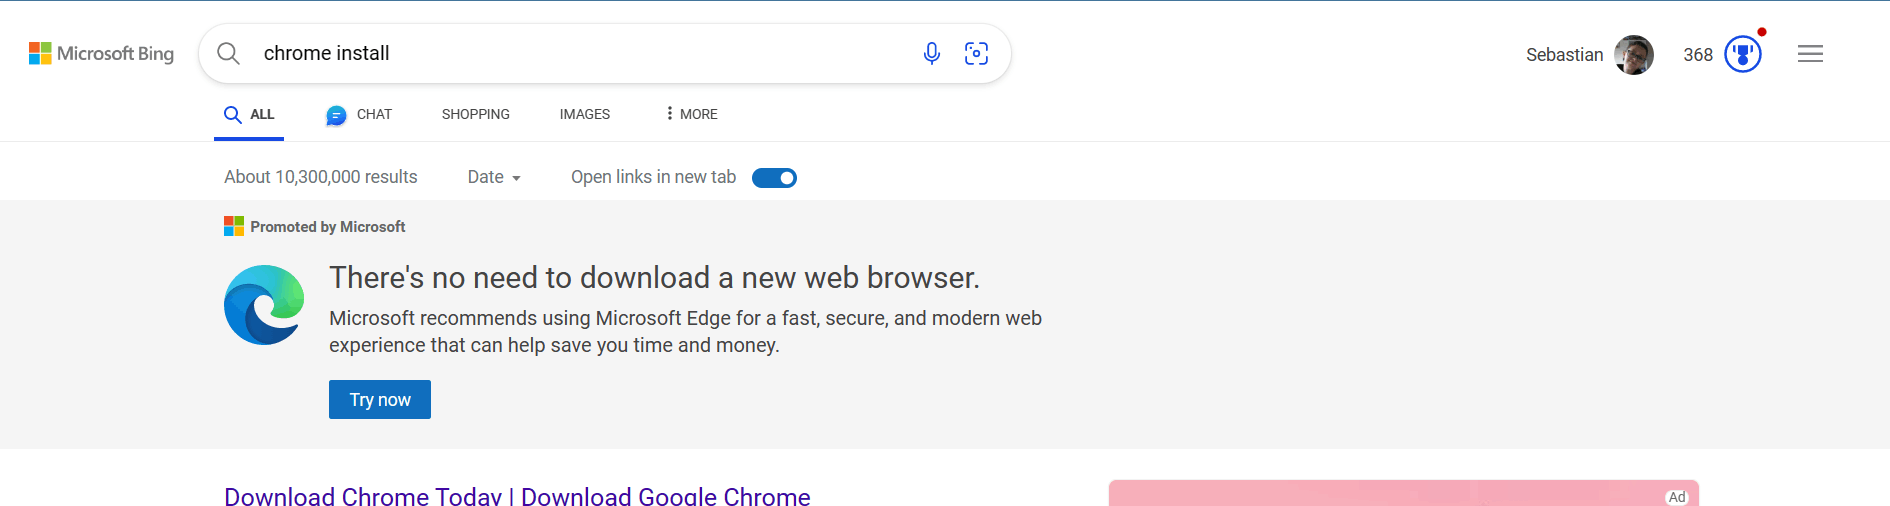 Microsoft Wants Its Edge Browser to Appeal to Gamers